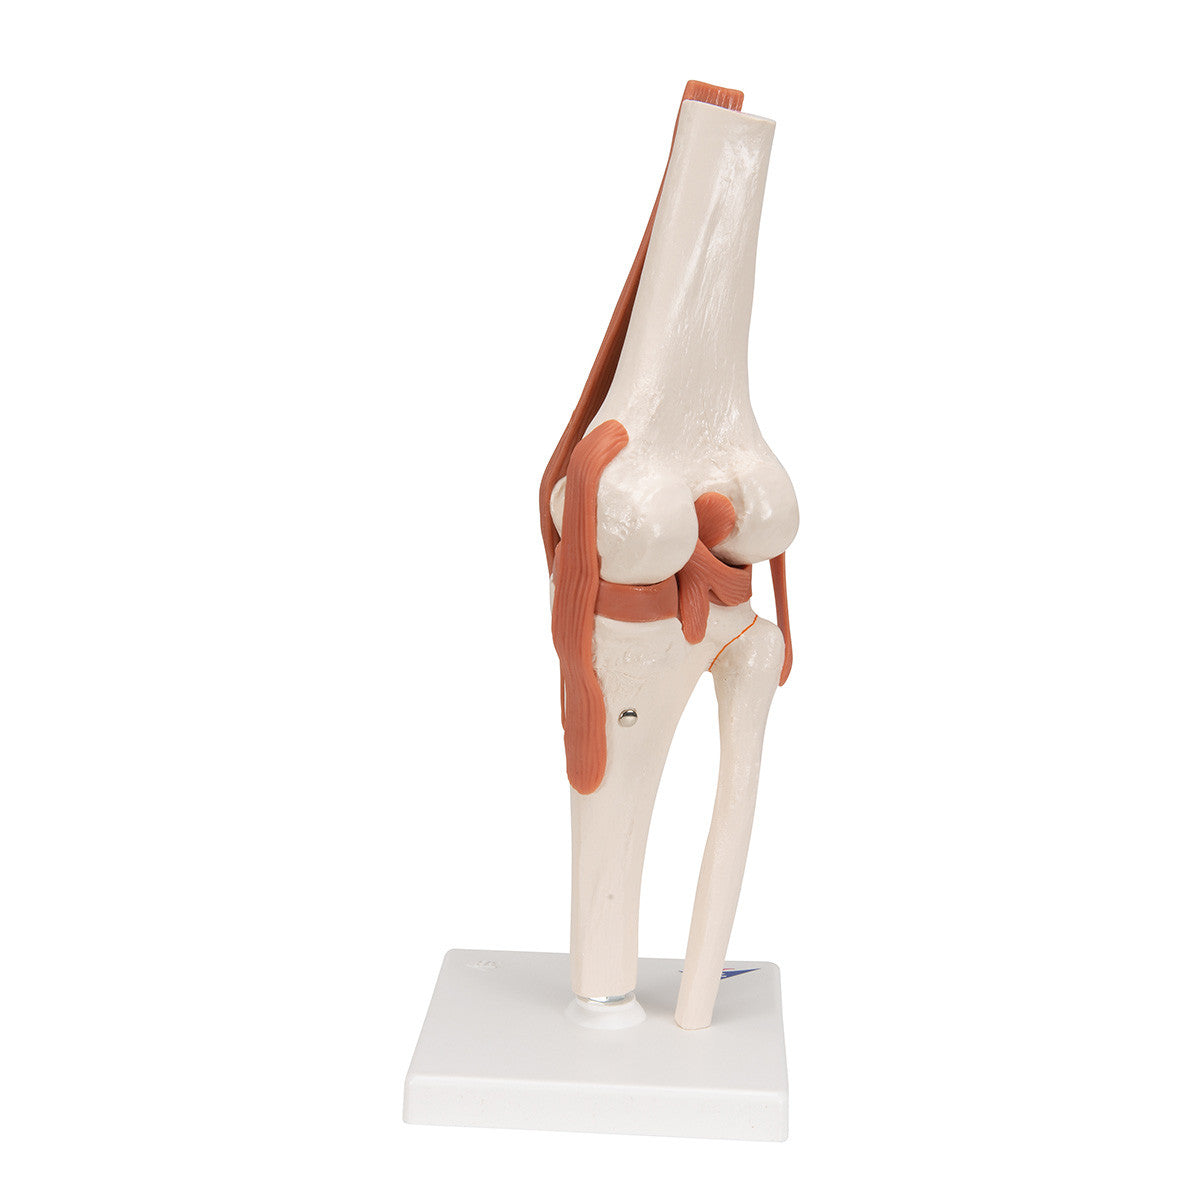 a82_03_1200_1200_functional-human-knee-joint-model-with-ligaments-3b-smart-anatomy__89939.1589753312.1280.1280.jpg